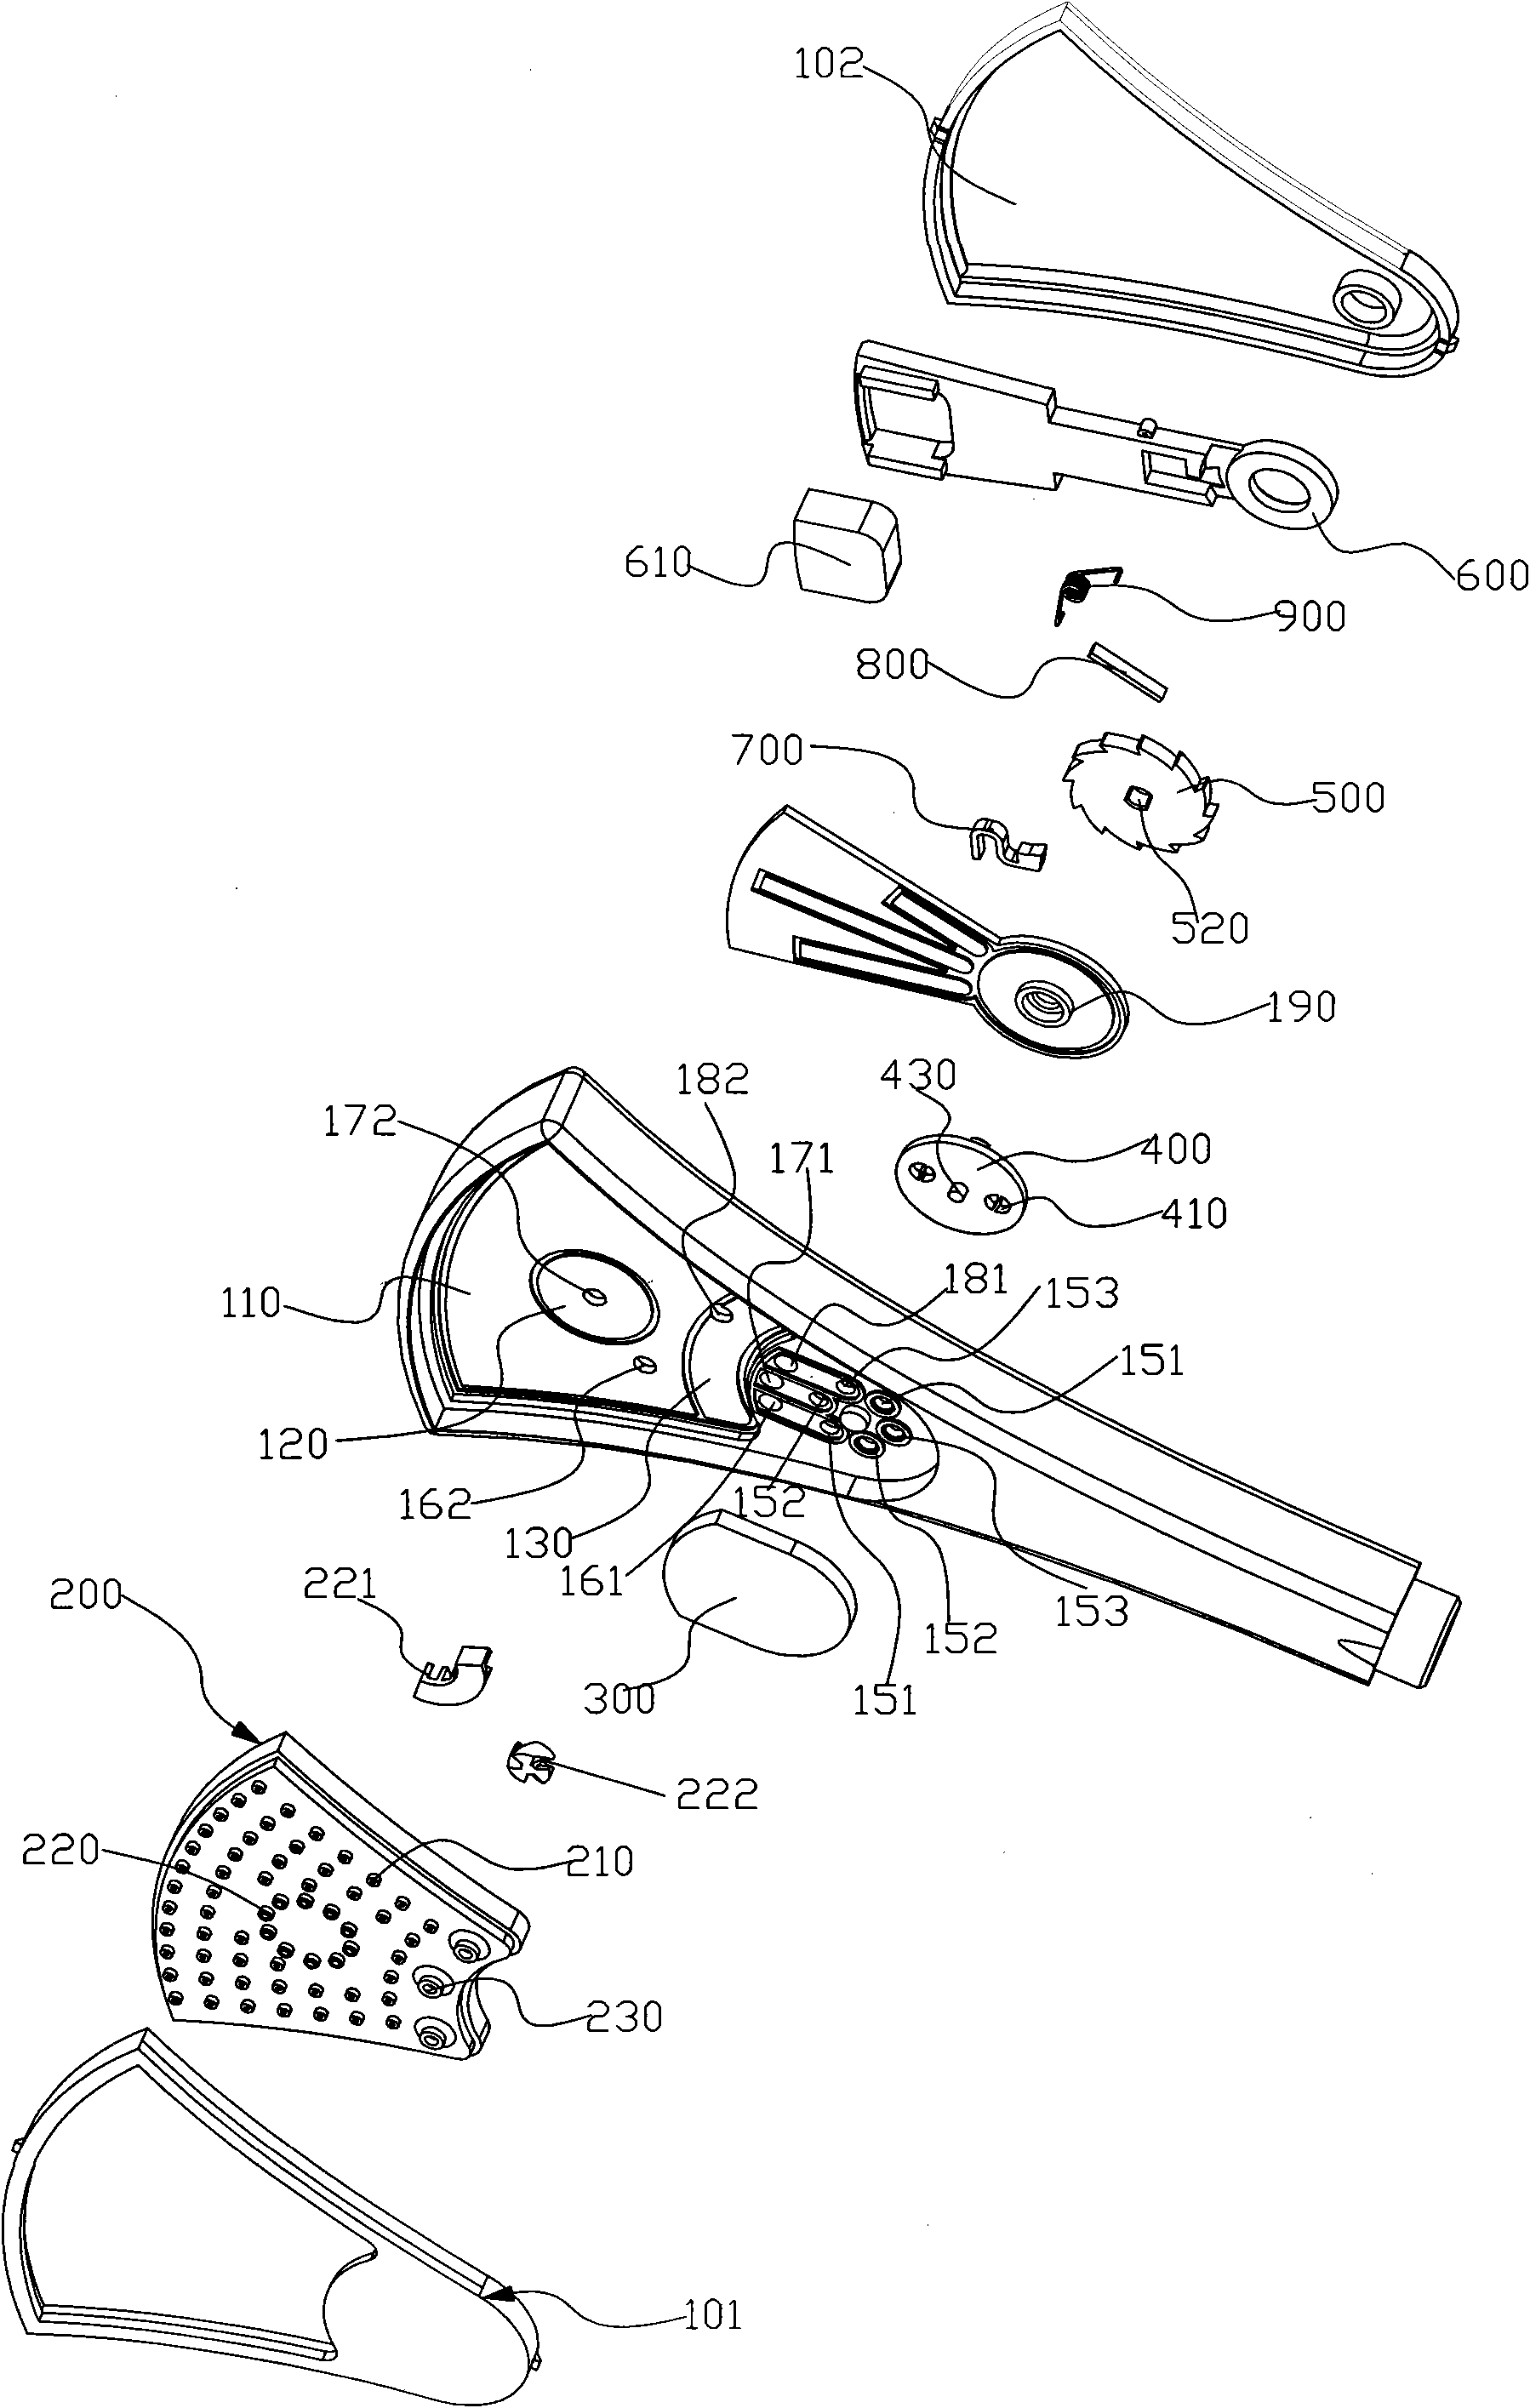 Whip switching sprinkler and switching method